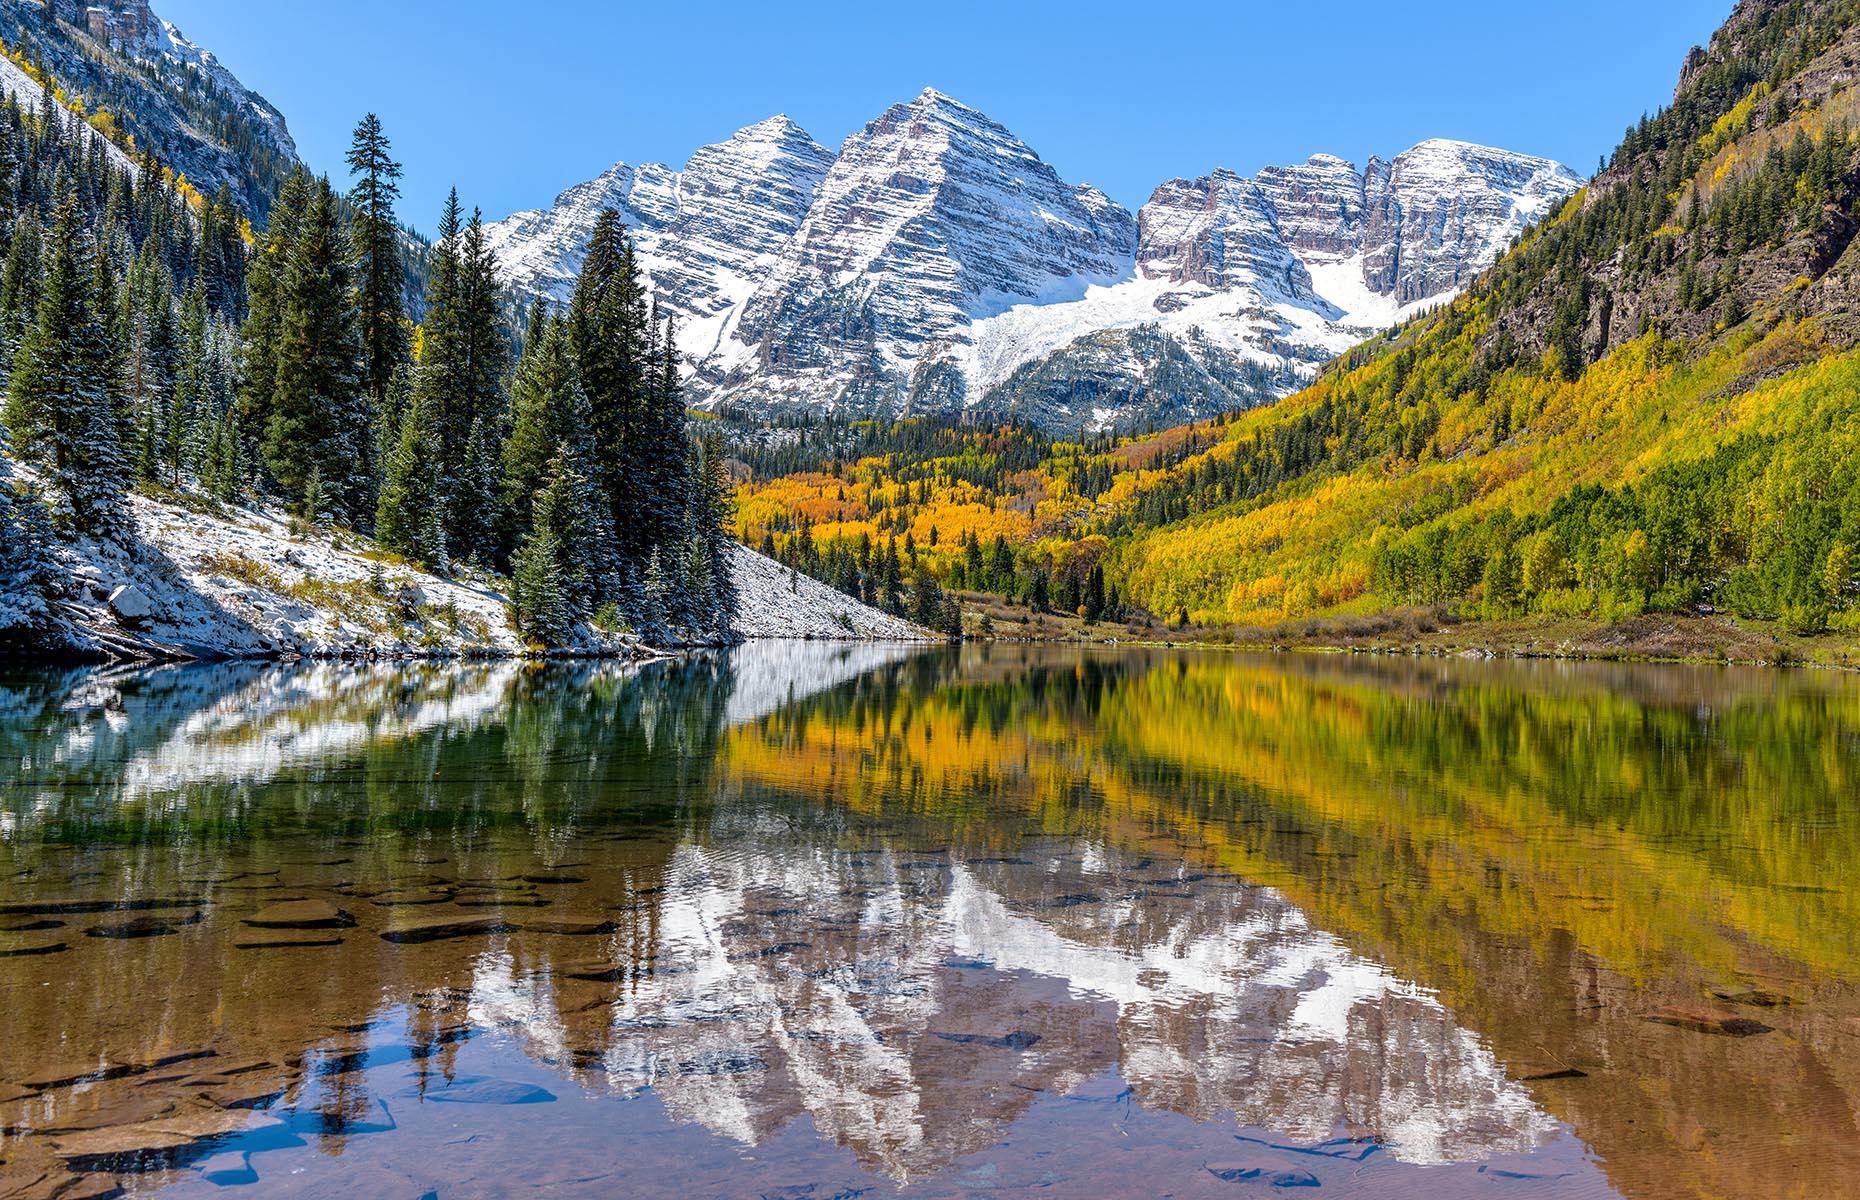 <p>Just 90 minutes from Denver, <a href="https://www.nps.gov/romo/index.htm">Rocky Mountain National Park</a> is perfect for those who love the outdoors. With more than 350 miles (563km) of trails, including flat hikes around a picturesque lake and harder climbs that take a few days, there’s something for everyone, whether it’s your first national park jaunt or you’re a seasoned adventurer. Scenery-wise, the park is hard to out-do, with roaming wildlife, glistening lakes and undulating mountains. Currently, reservations are required to enter the park.</p>